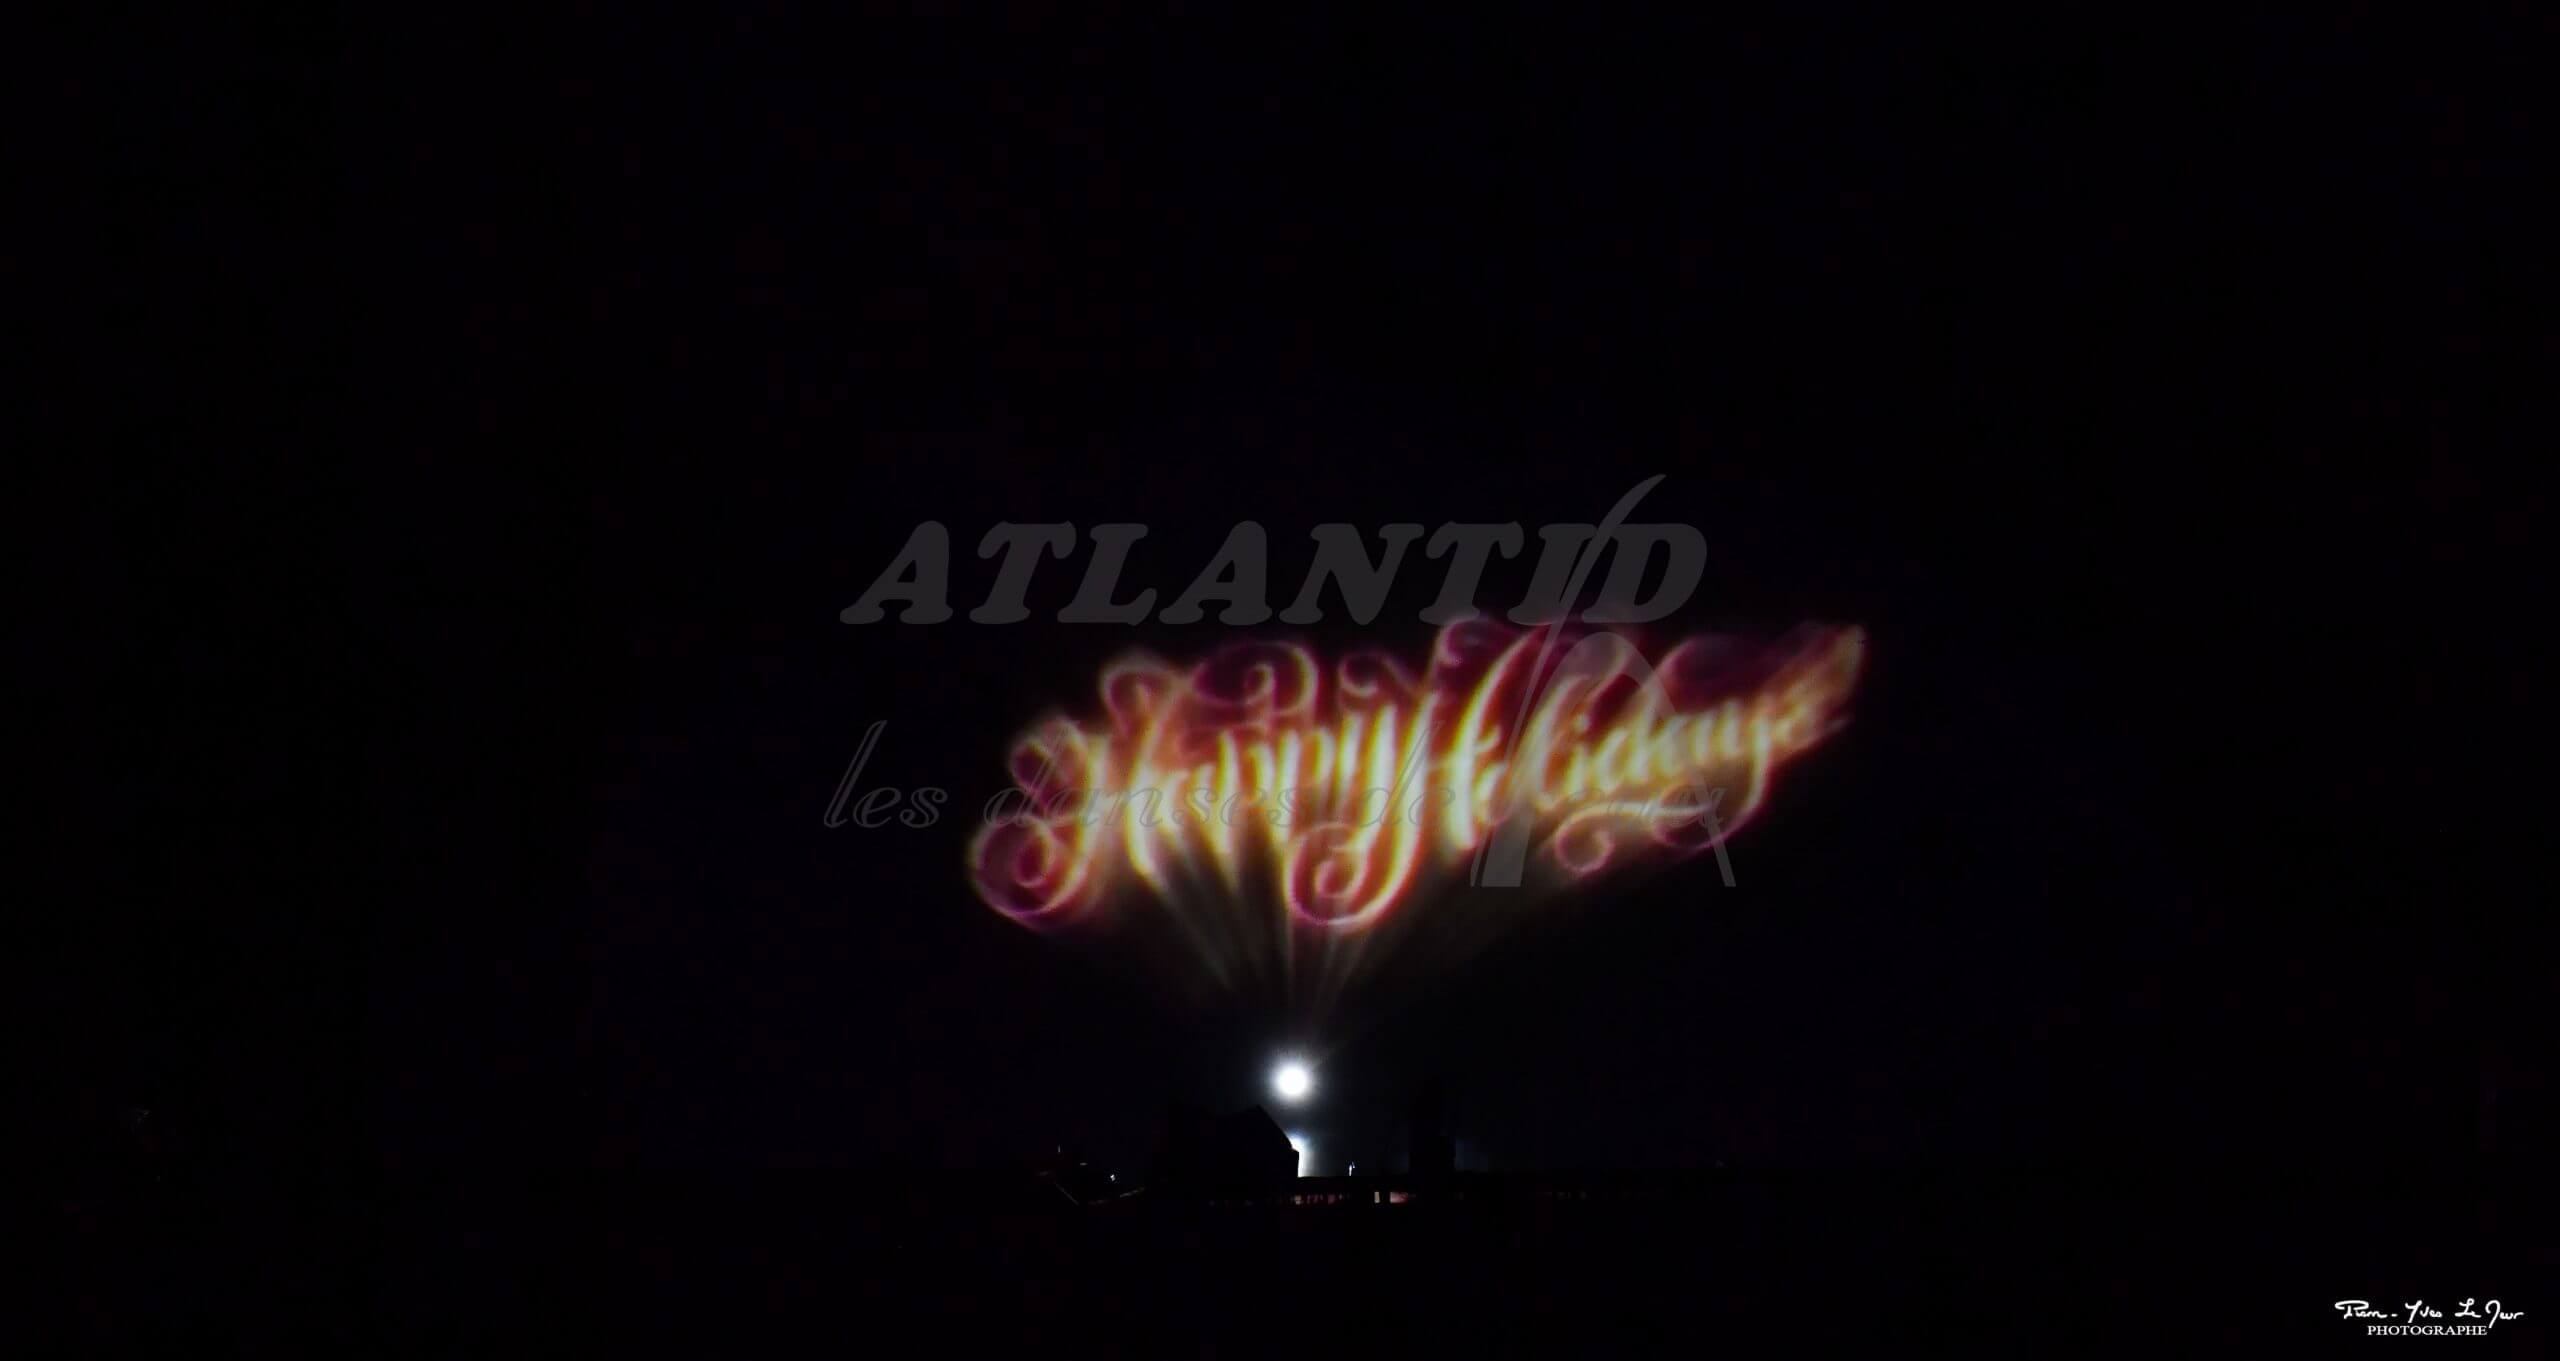 Atlantid - Happy Holidays text projection on water